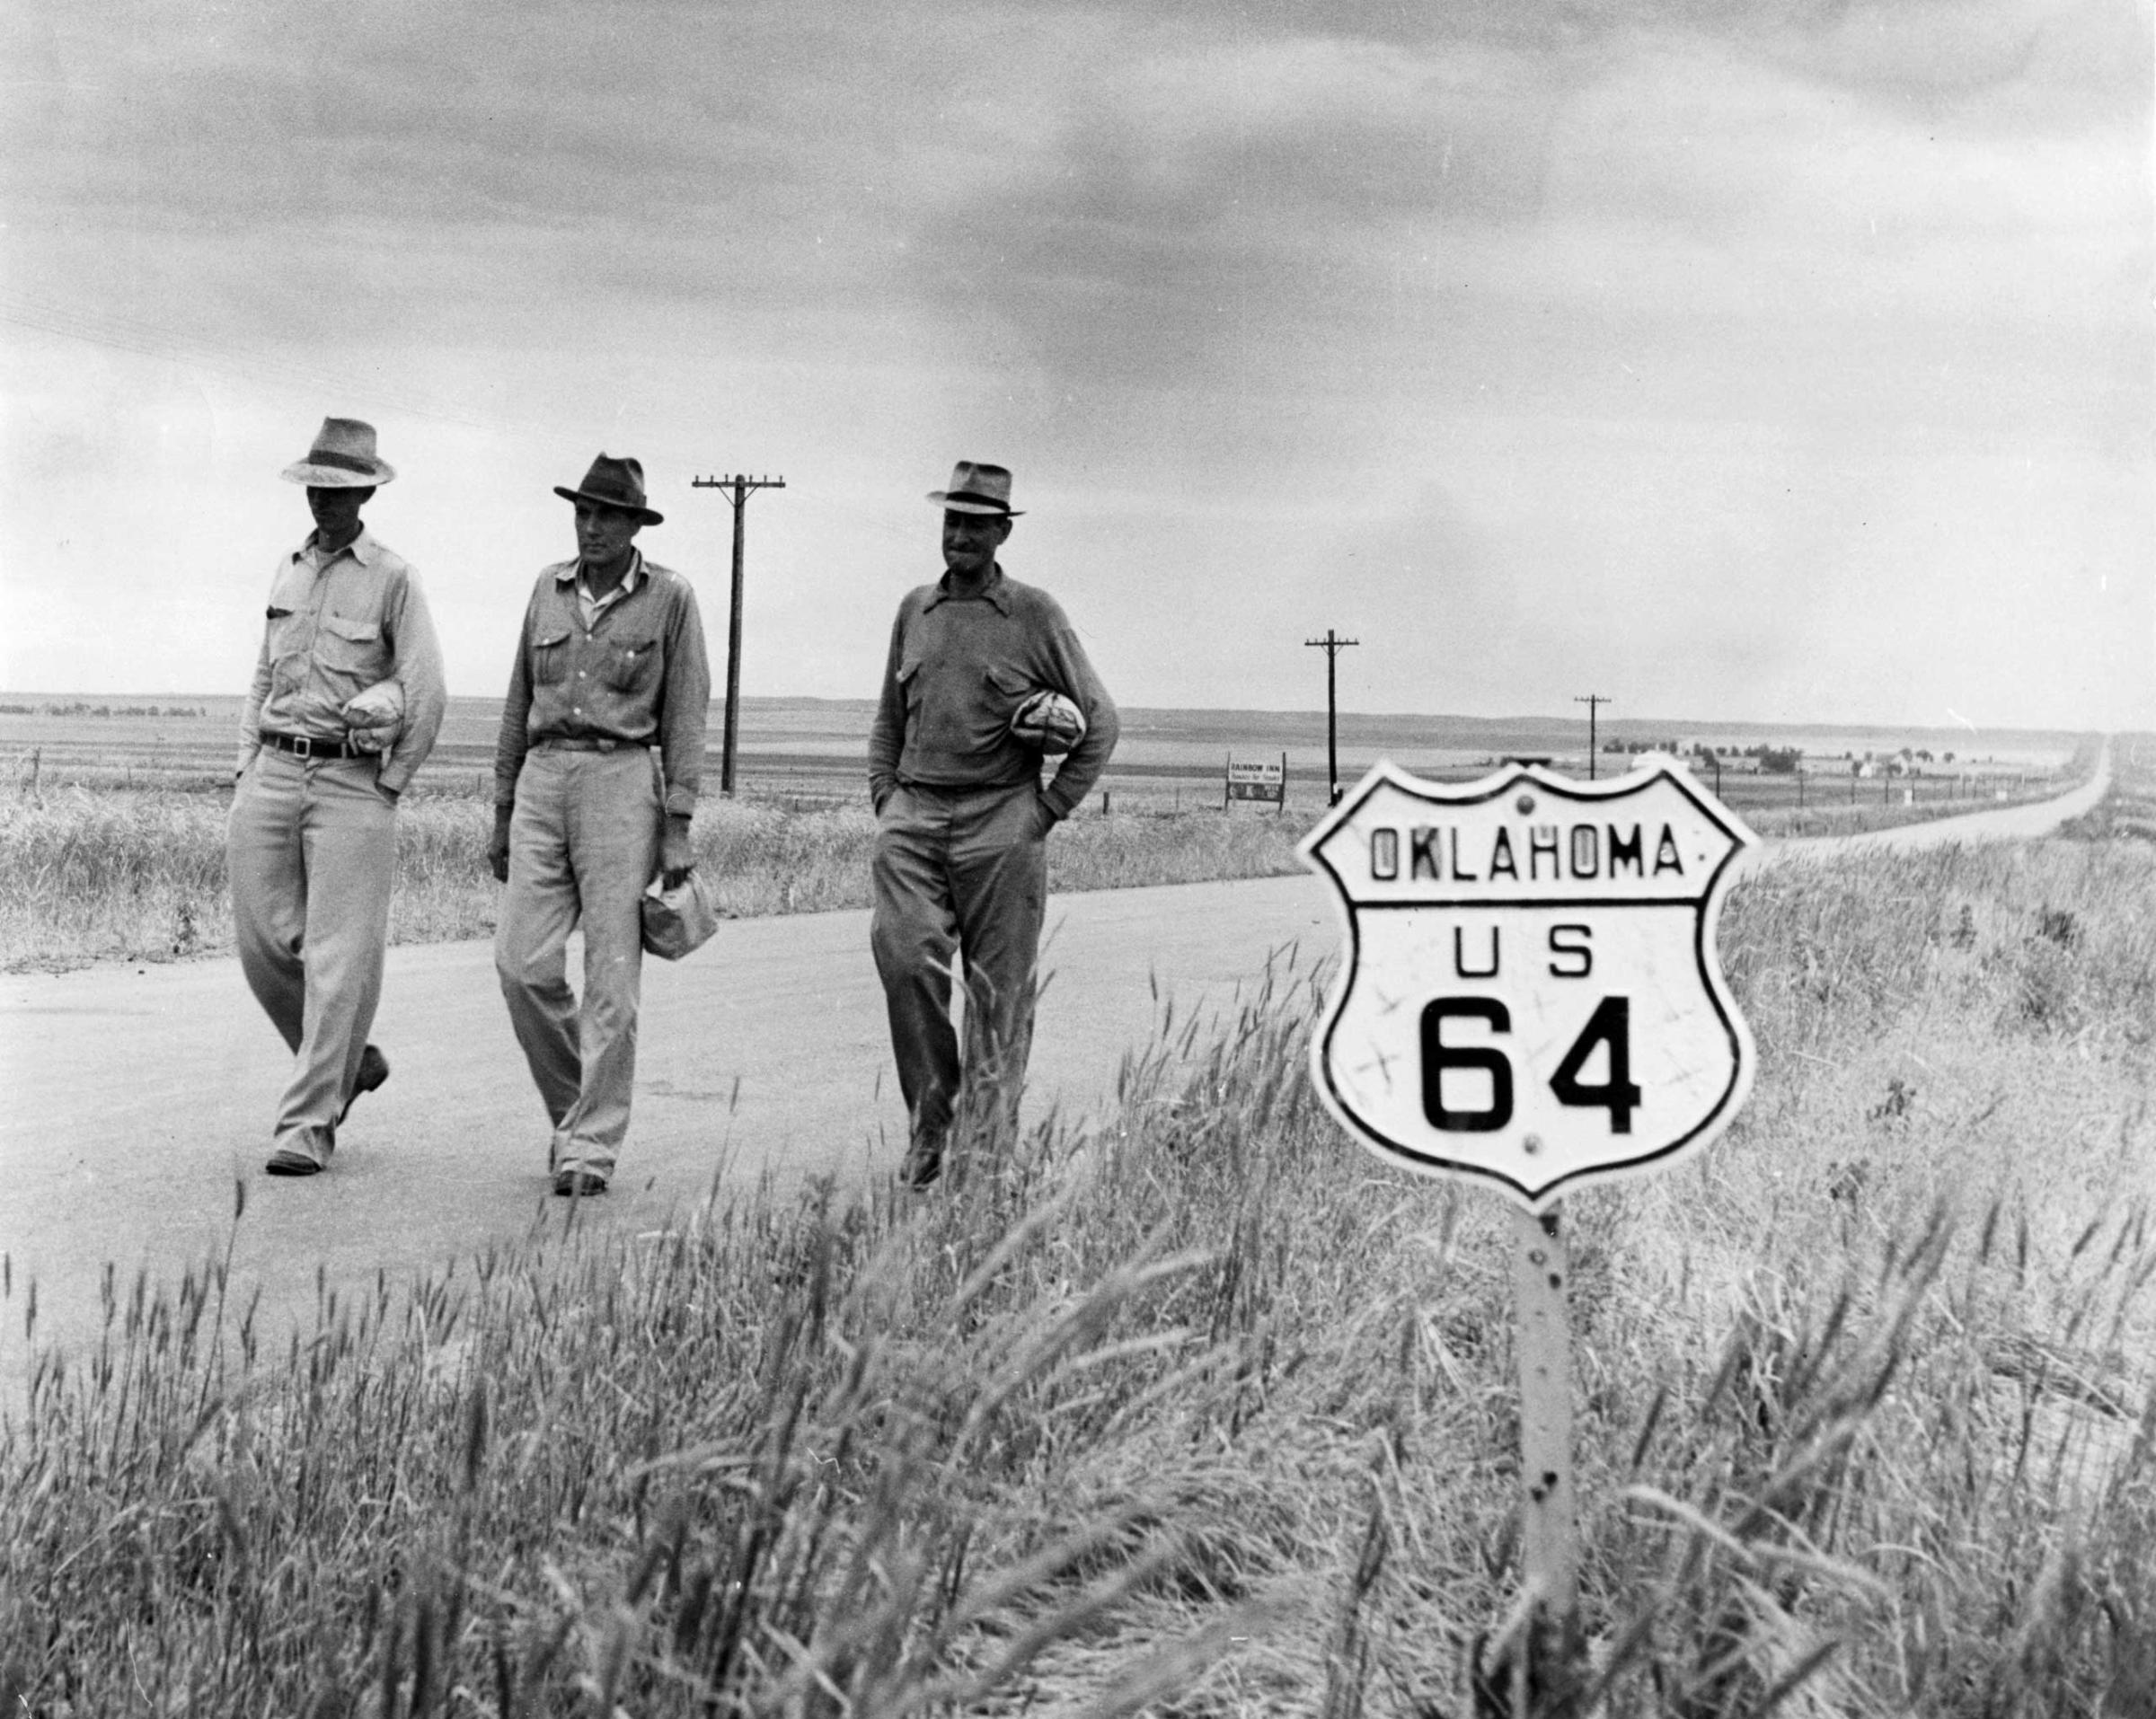 Harvesters hitchhike to a wheat harvesting, Oklahoma, 1942.